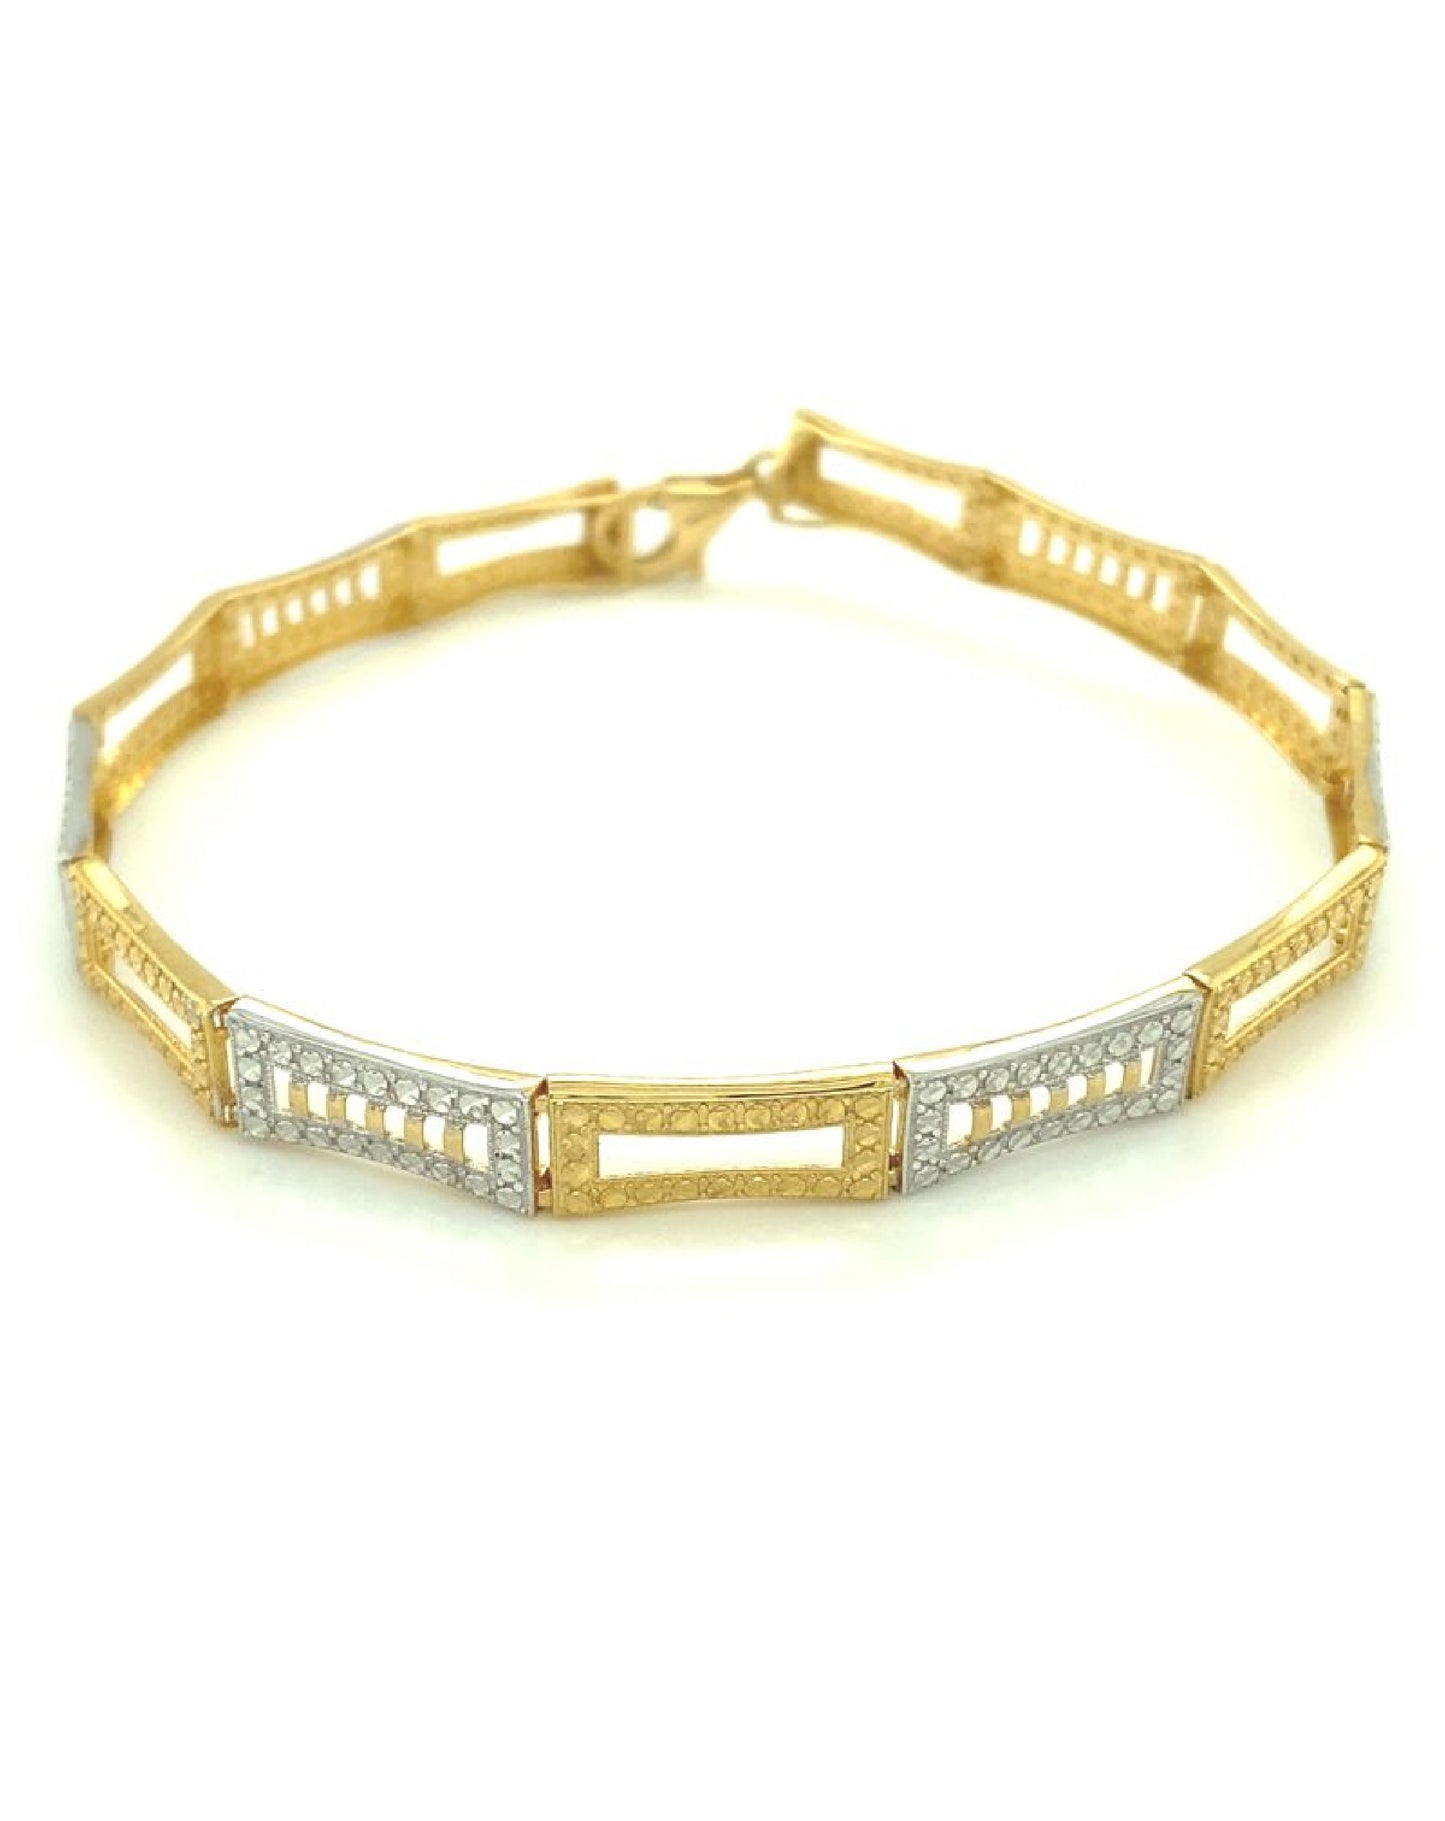 Gold 18 kt Yellow/White Two - Tone Gold Bracelet With Links 750mls Jewelry